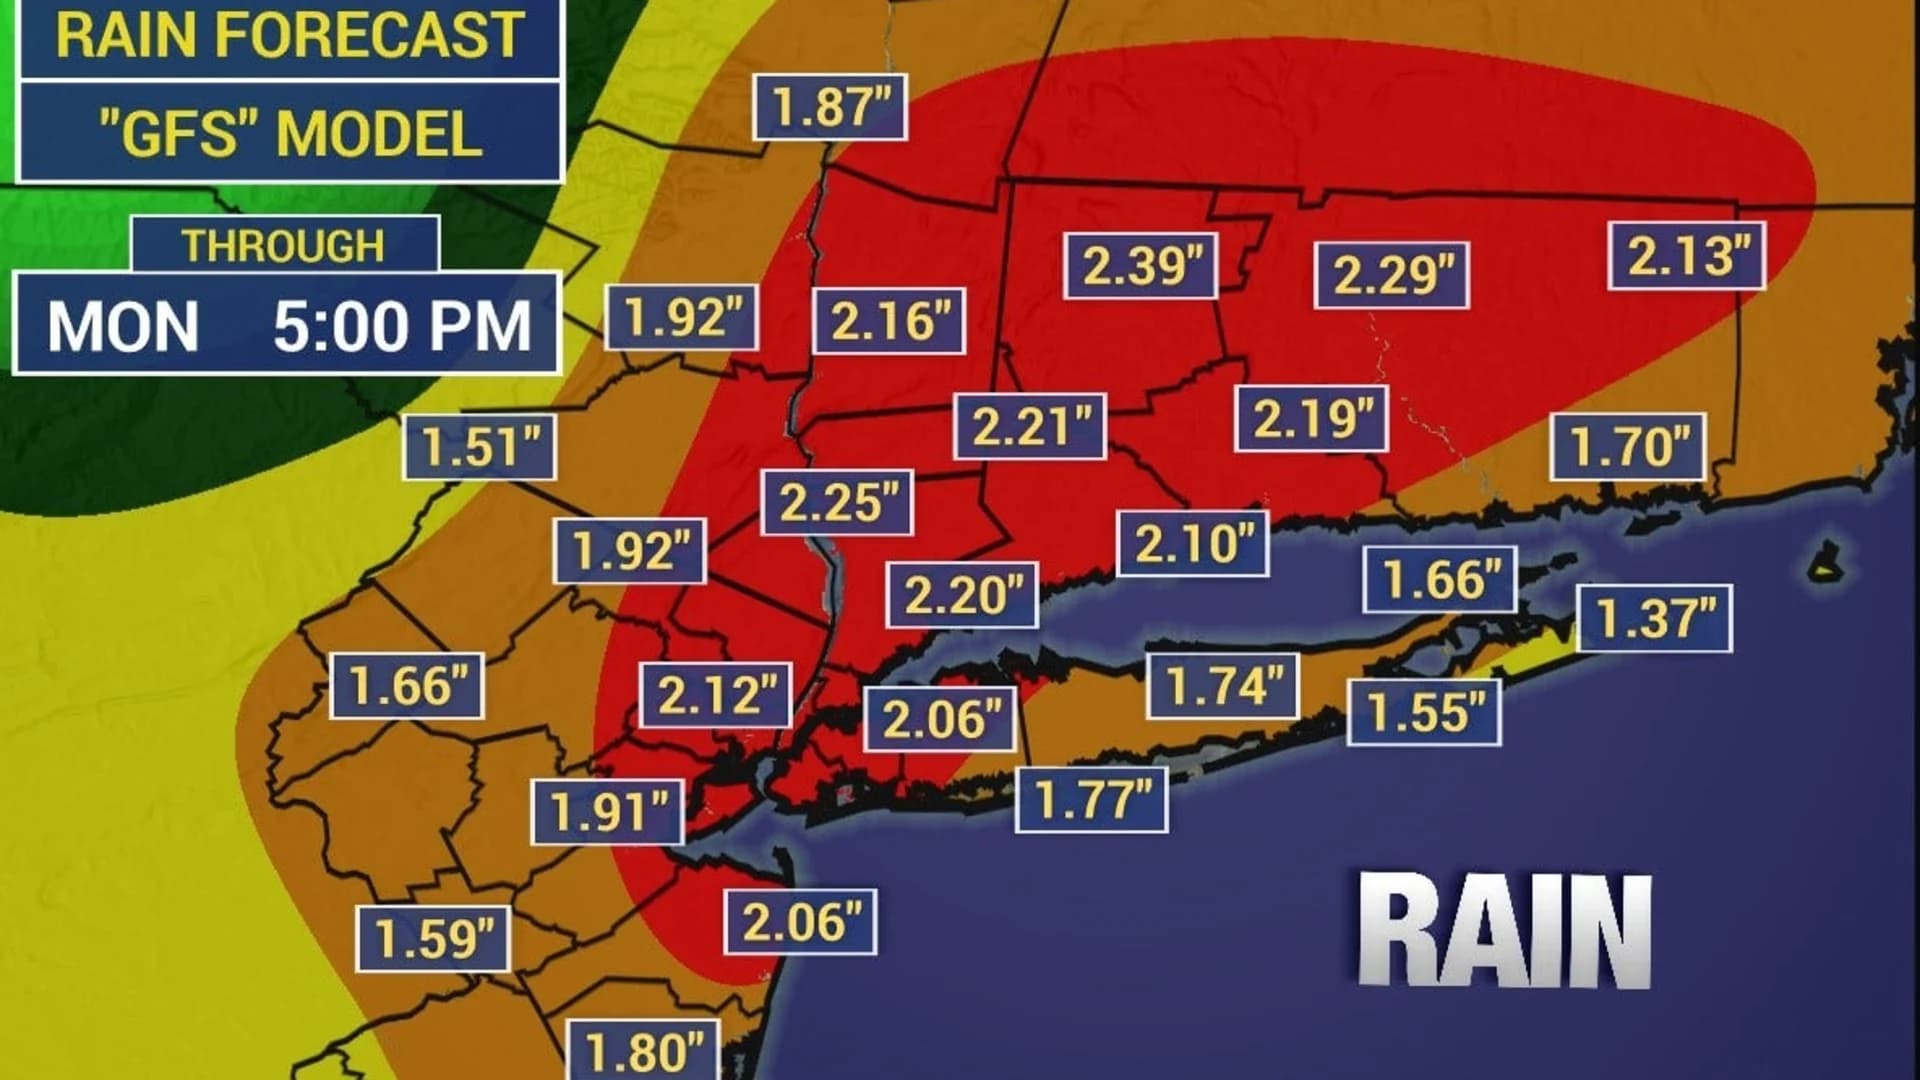 Heavy rain brings wet, windy weather throughout day